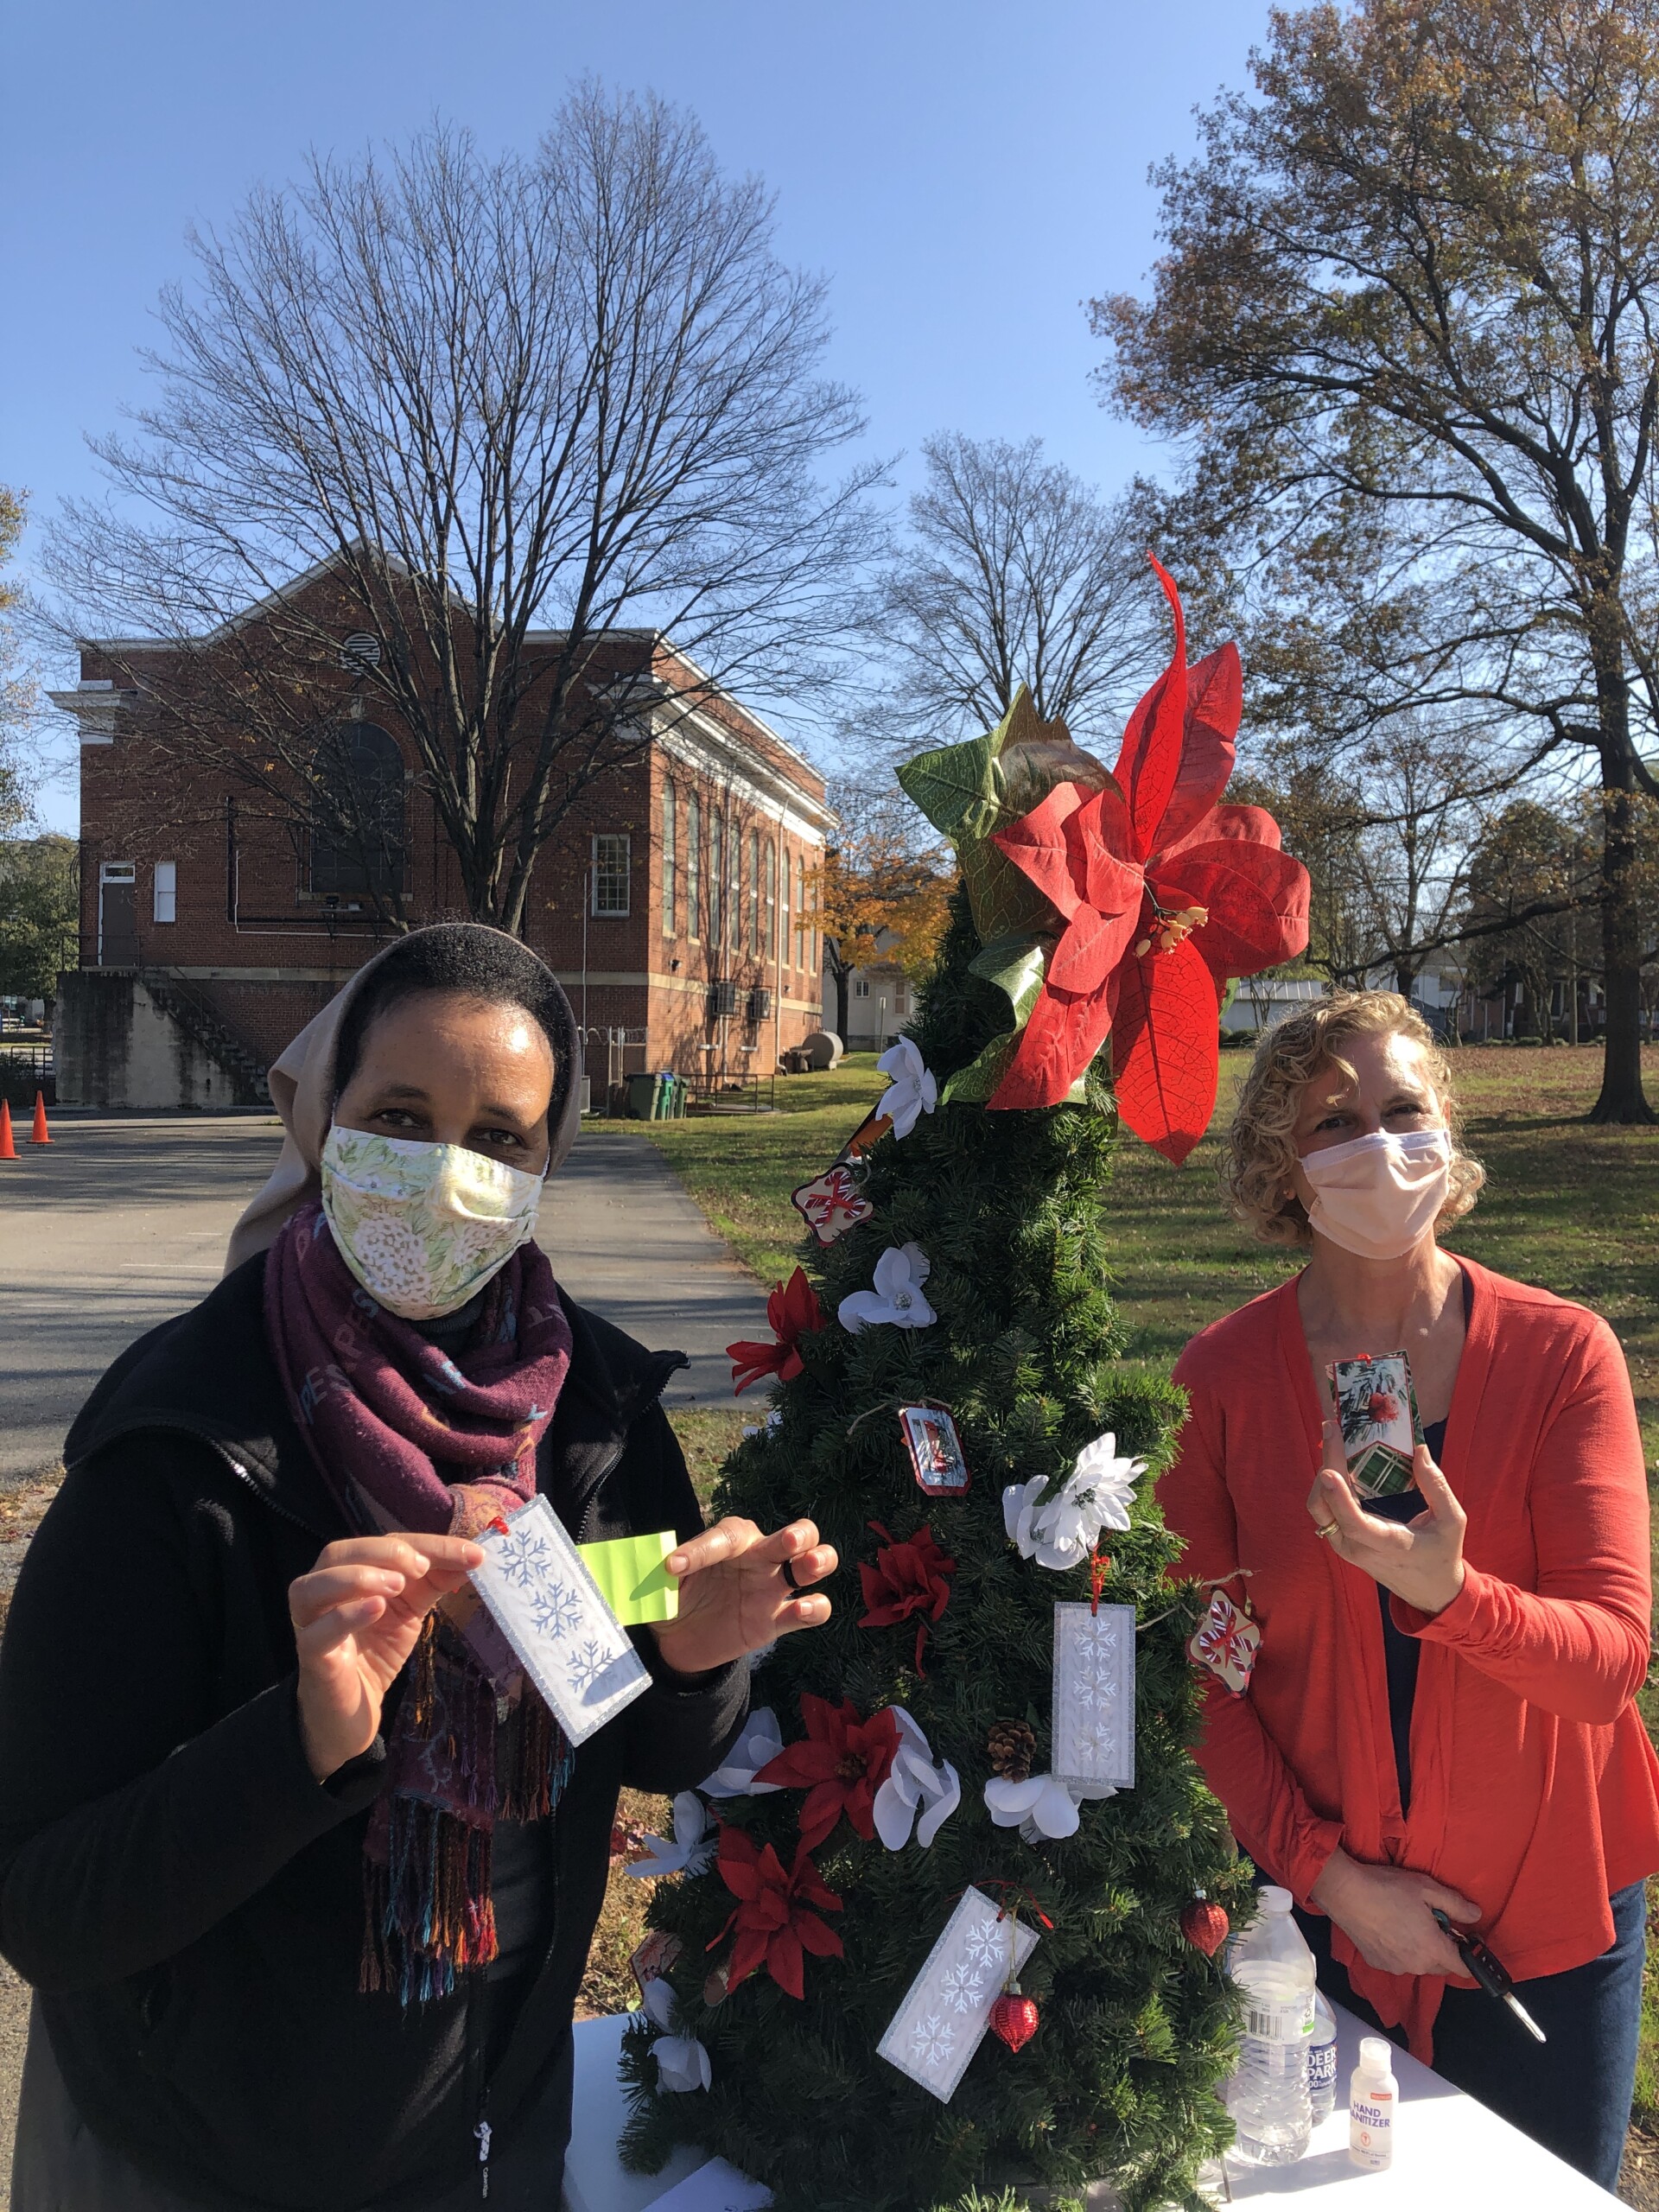 Two women, both wearing masks, in front of a small tree decorated with gift tags and a red bow